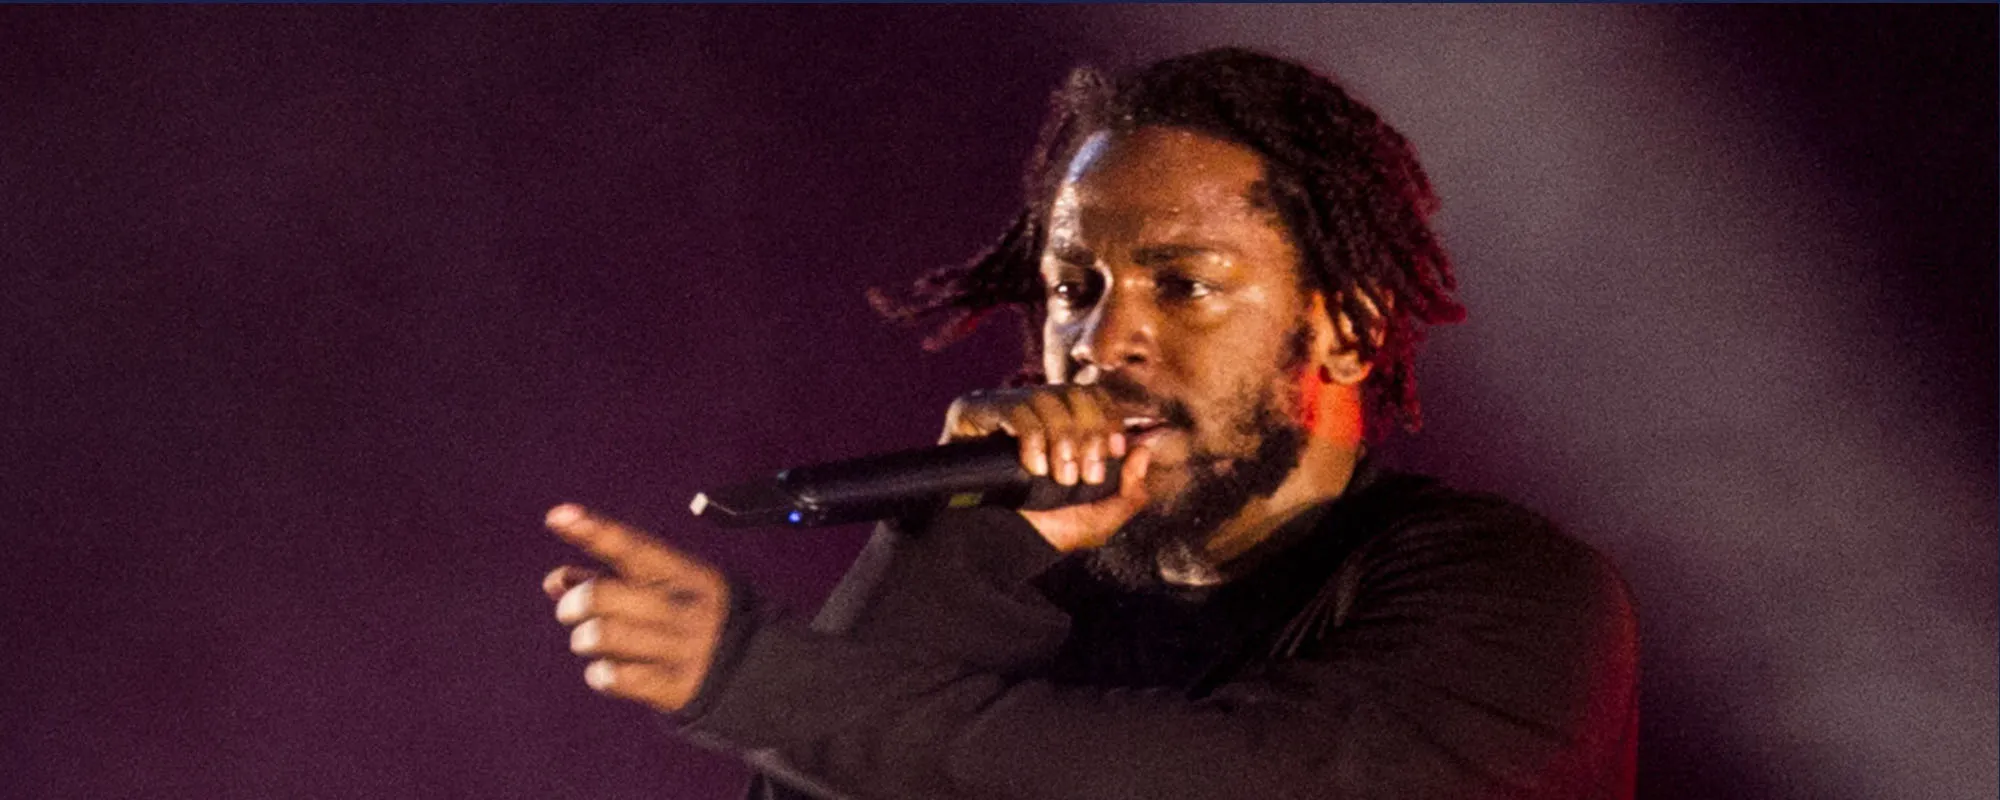 Kendrick Lamar Thanks Jay-Z for Not Charging Him on a Vocal Sample